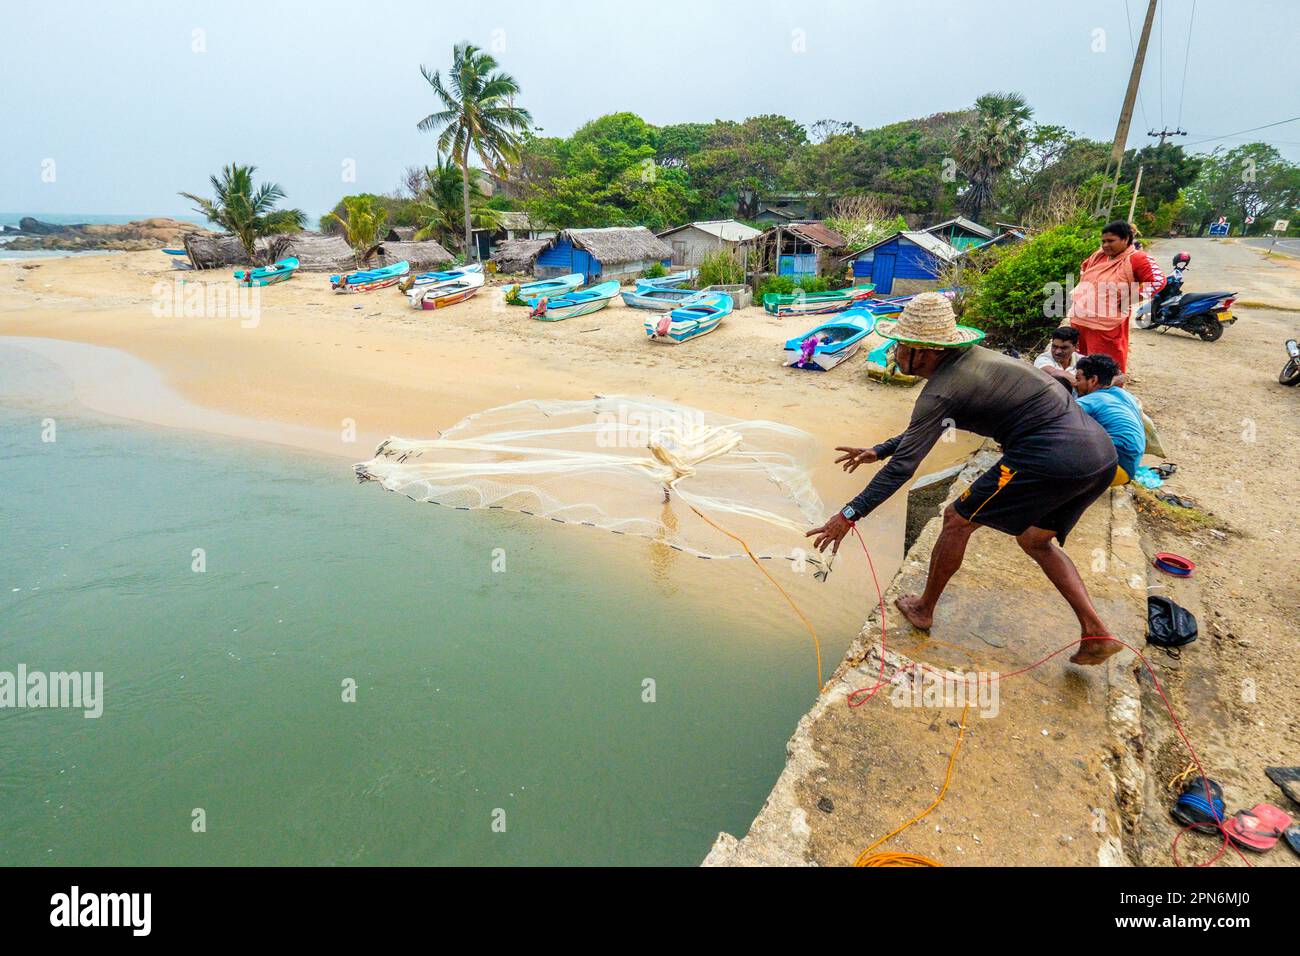 Fisherman casting a net from a bridge over a river in Sri Lanka Stock Photo